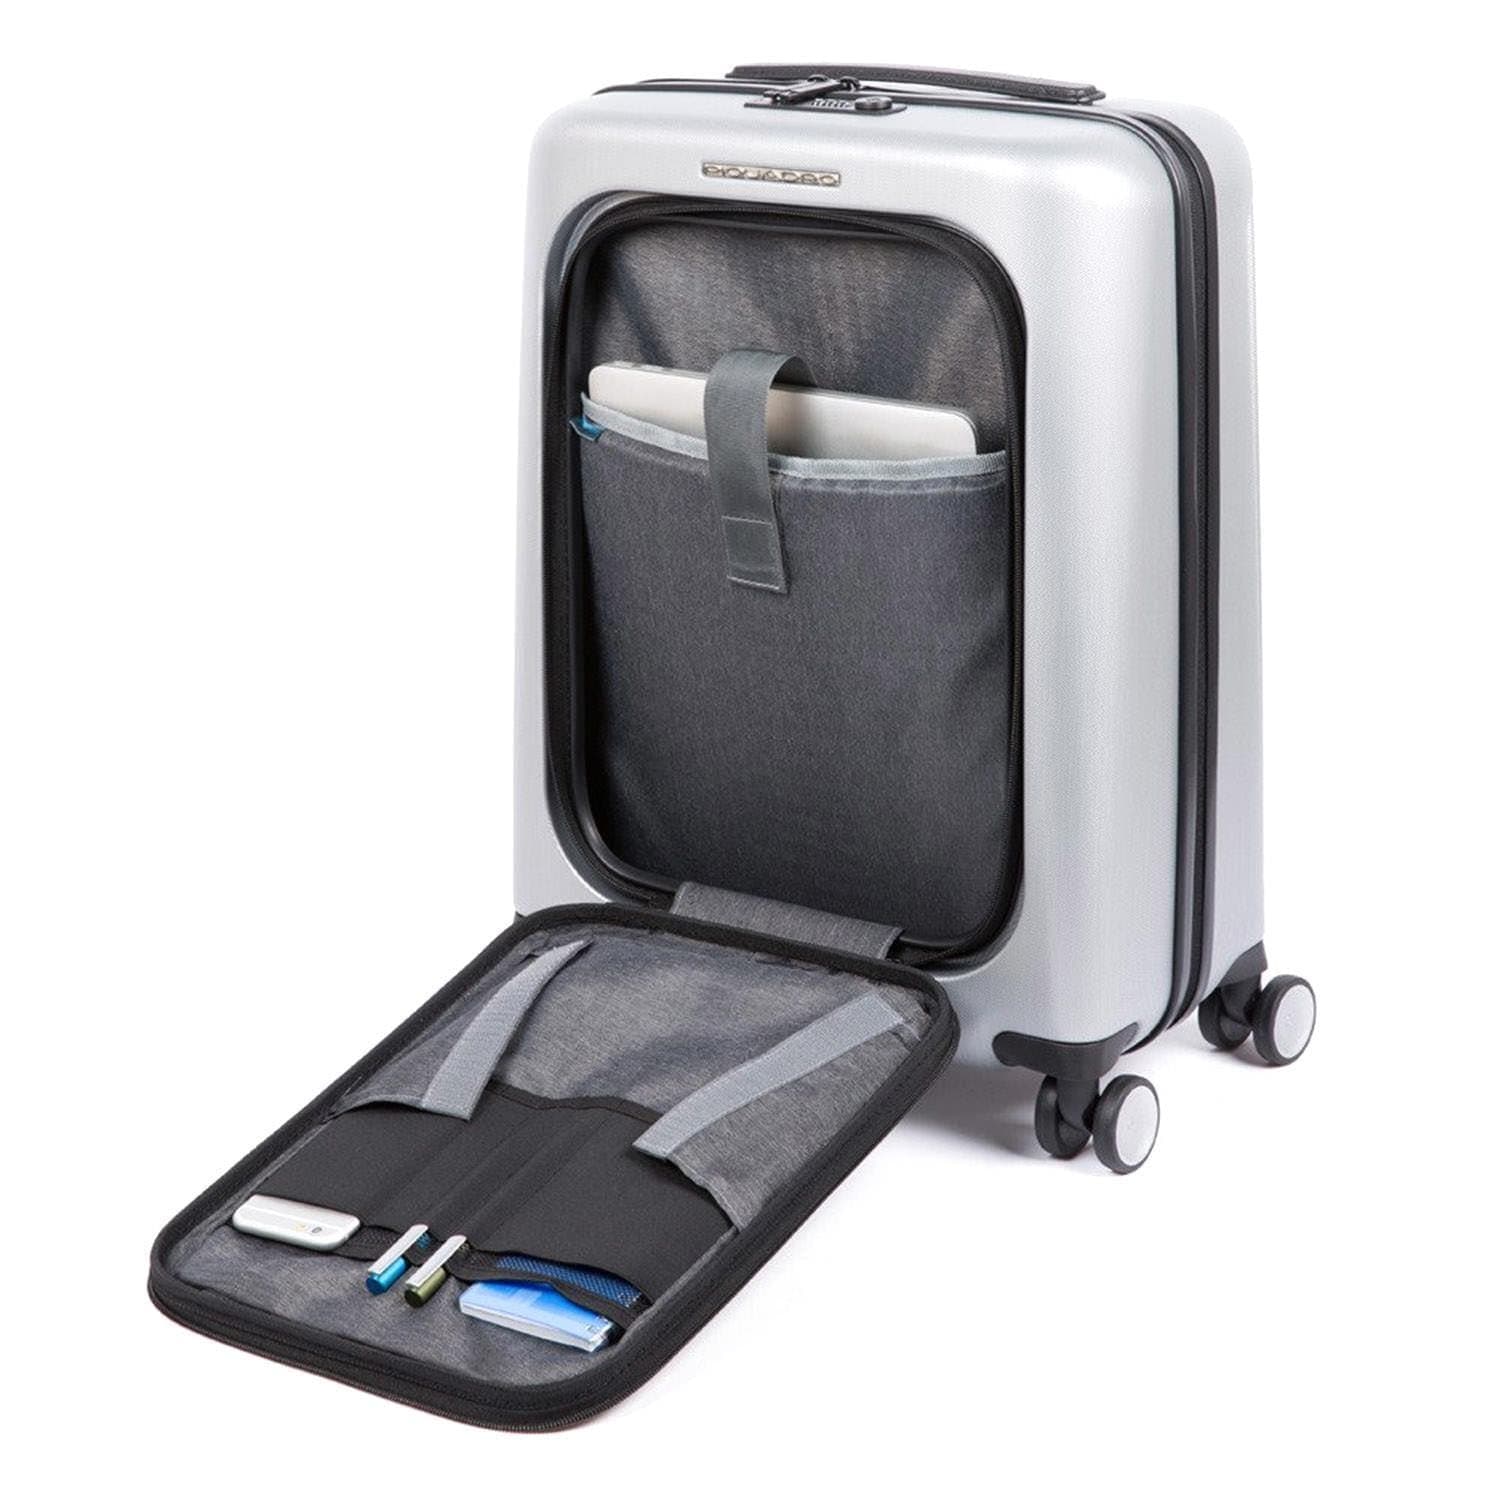 Piquadro Relyght Plus Hard Side Spinner Trolley Bag - Grey - BV4426PC2PZ/GRN - Jashanmal Home